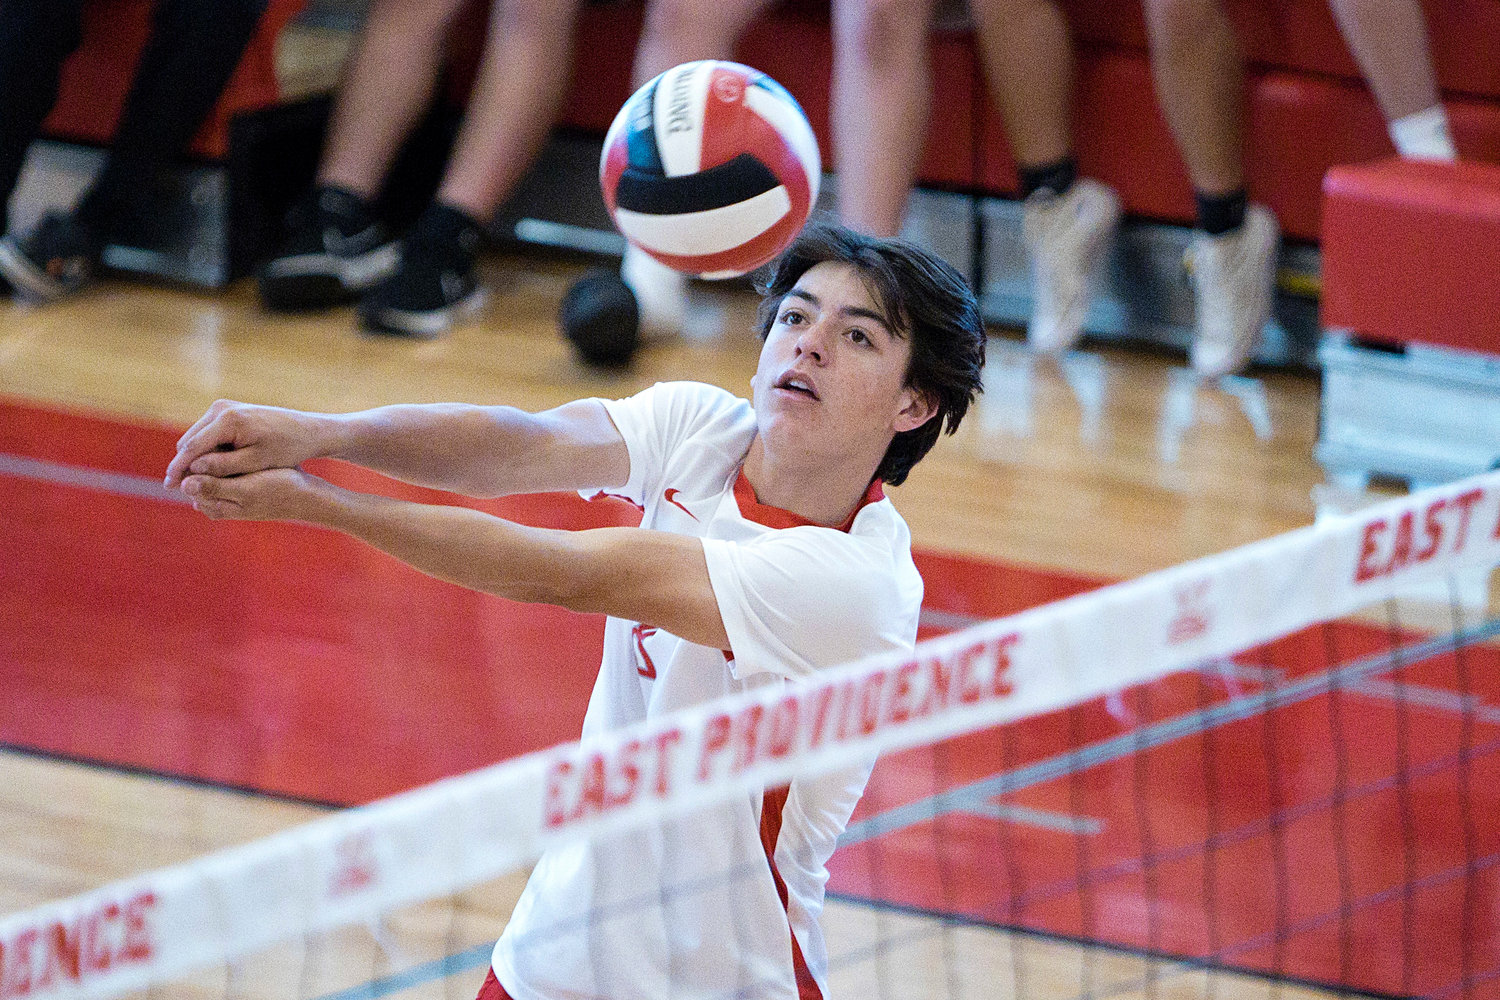 East Providence High School’s Brett Schwab bumps the ball over the net while competing against Westerly in the Division II boys' volleyball semifinals, Wednesday, June 8.